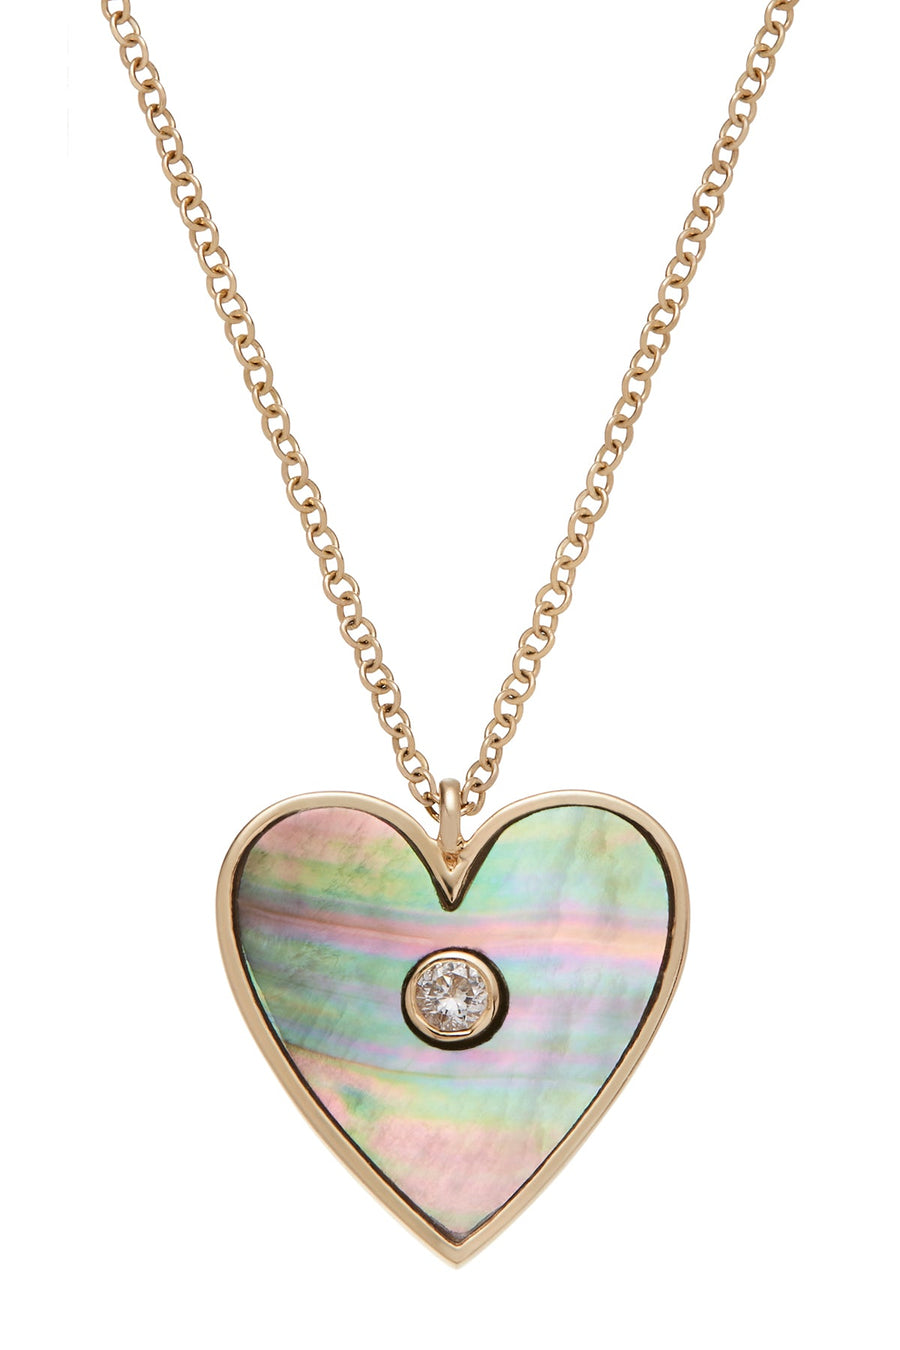 BLACK MOTHER OF PEARL HEART NECKLACE W/ DIAMOND